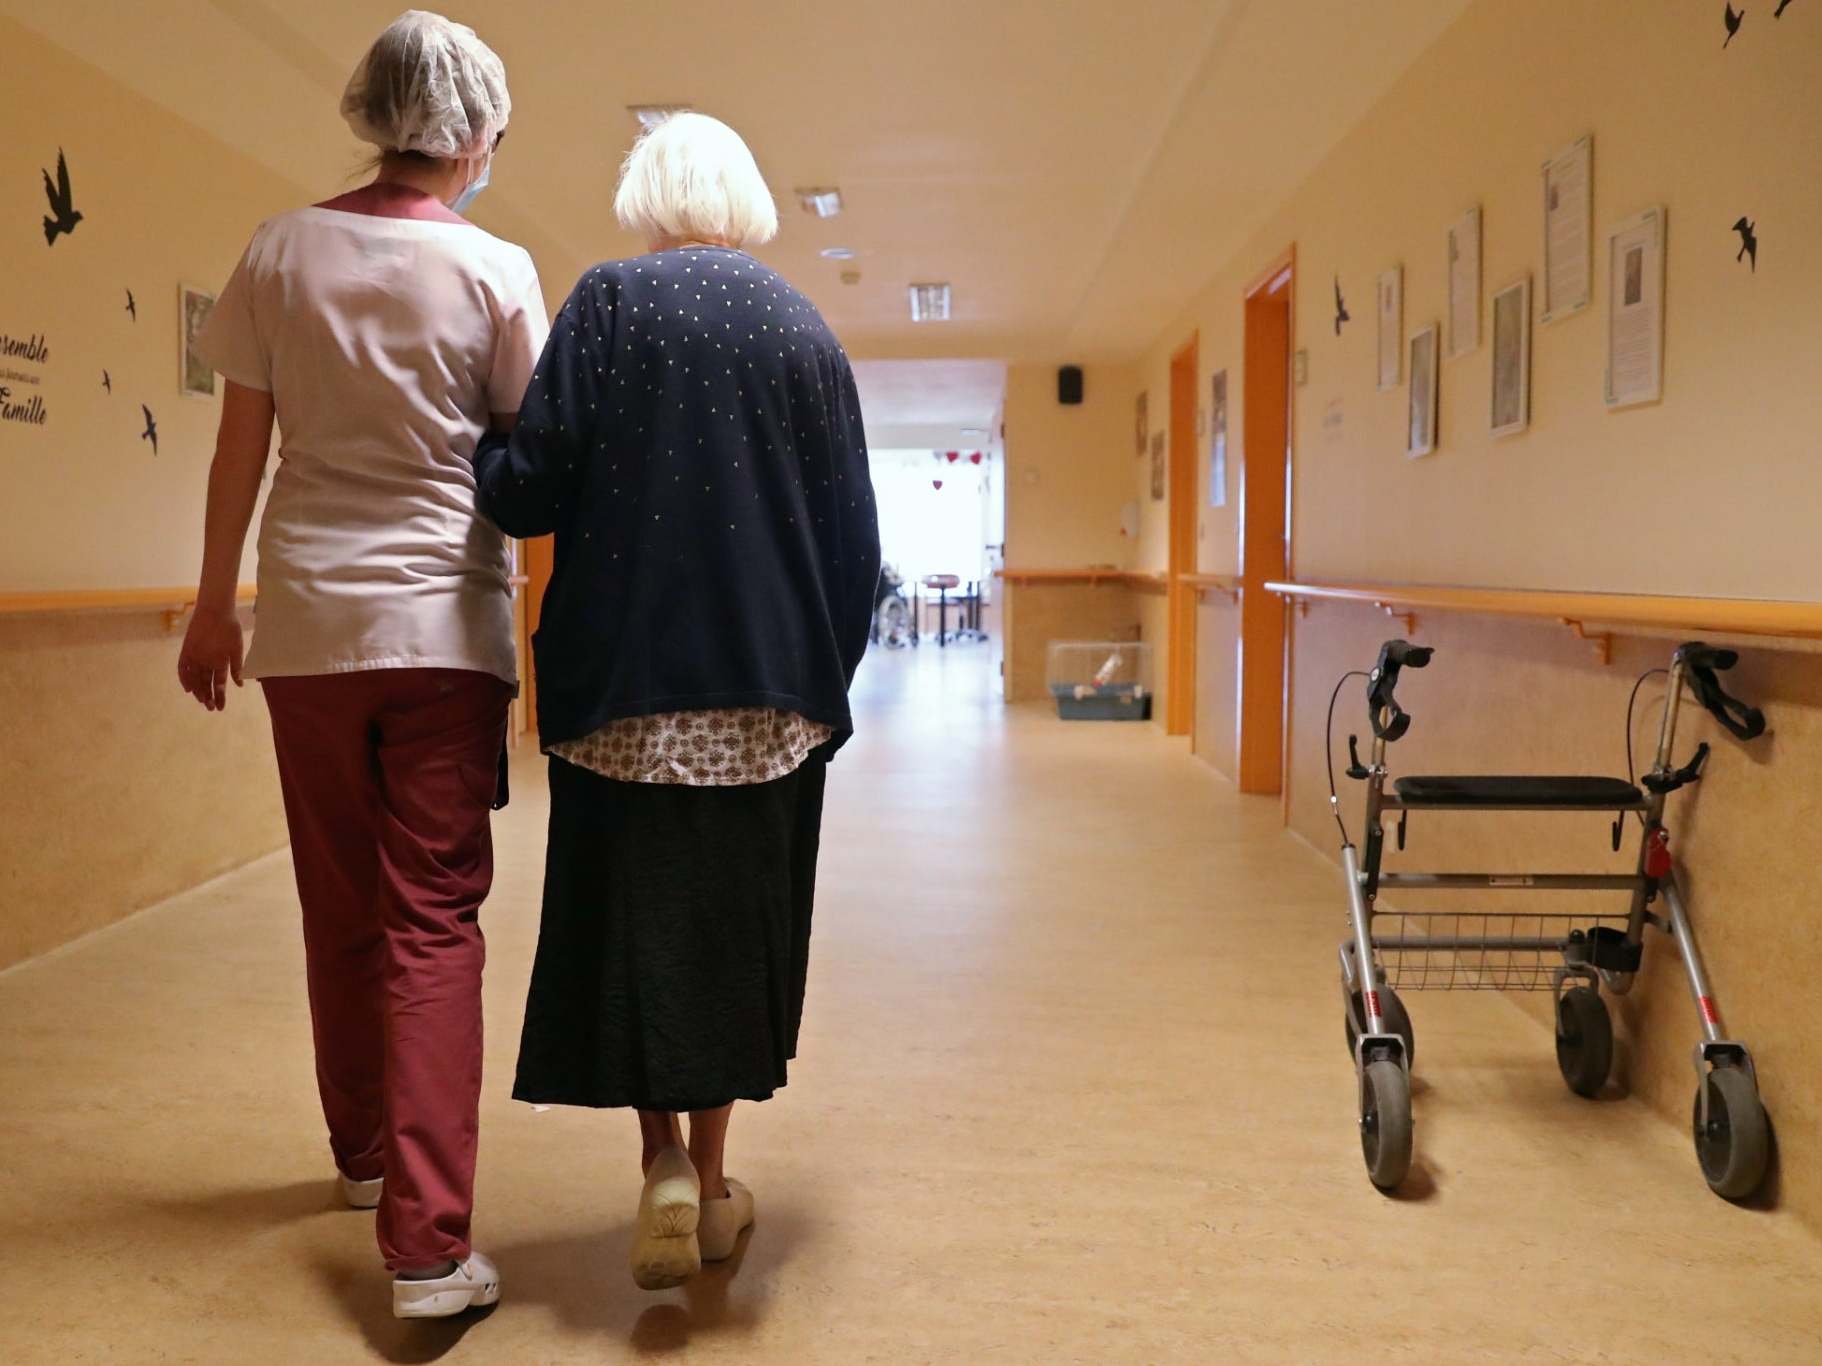 The Care Quality Commission has raised fears that providers could go out of business